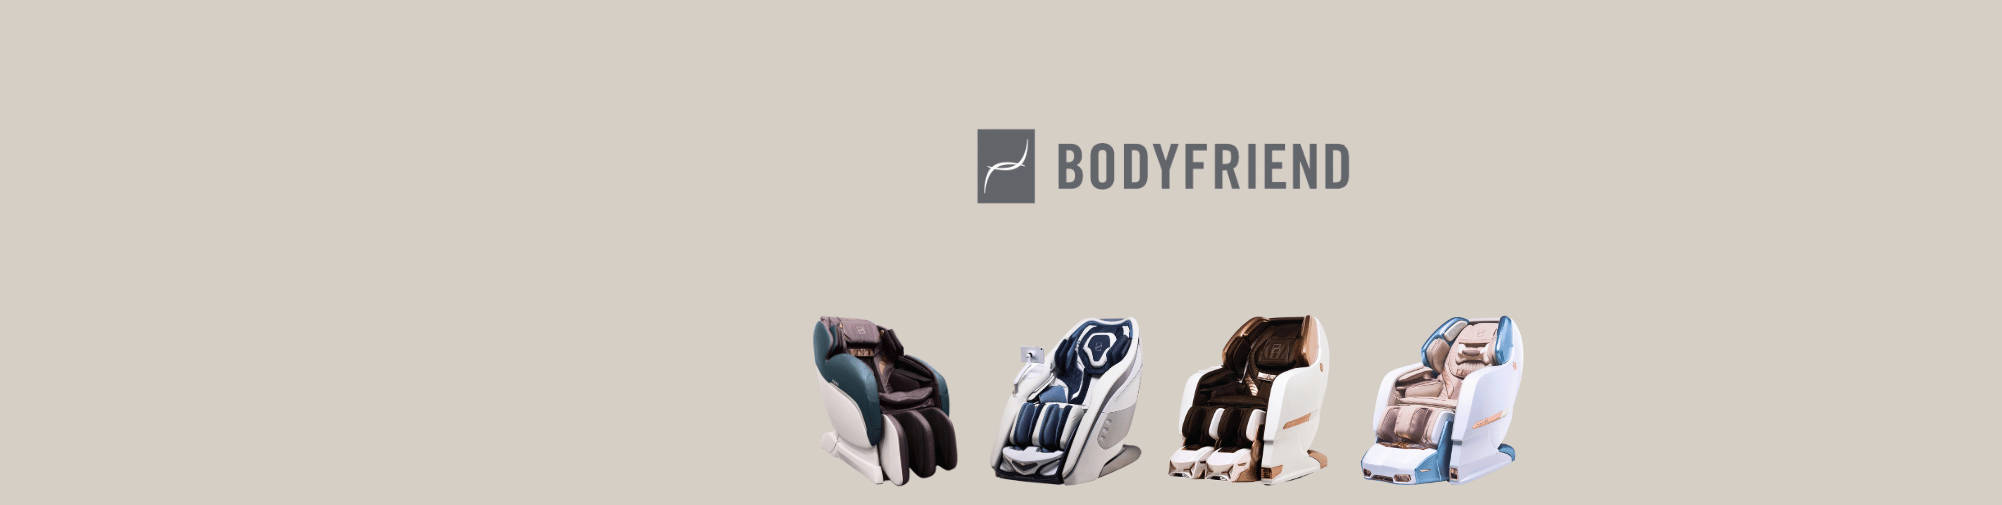 Bodyfriend massage chair now also available in Germany